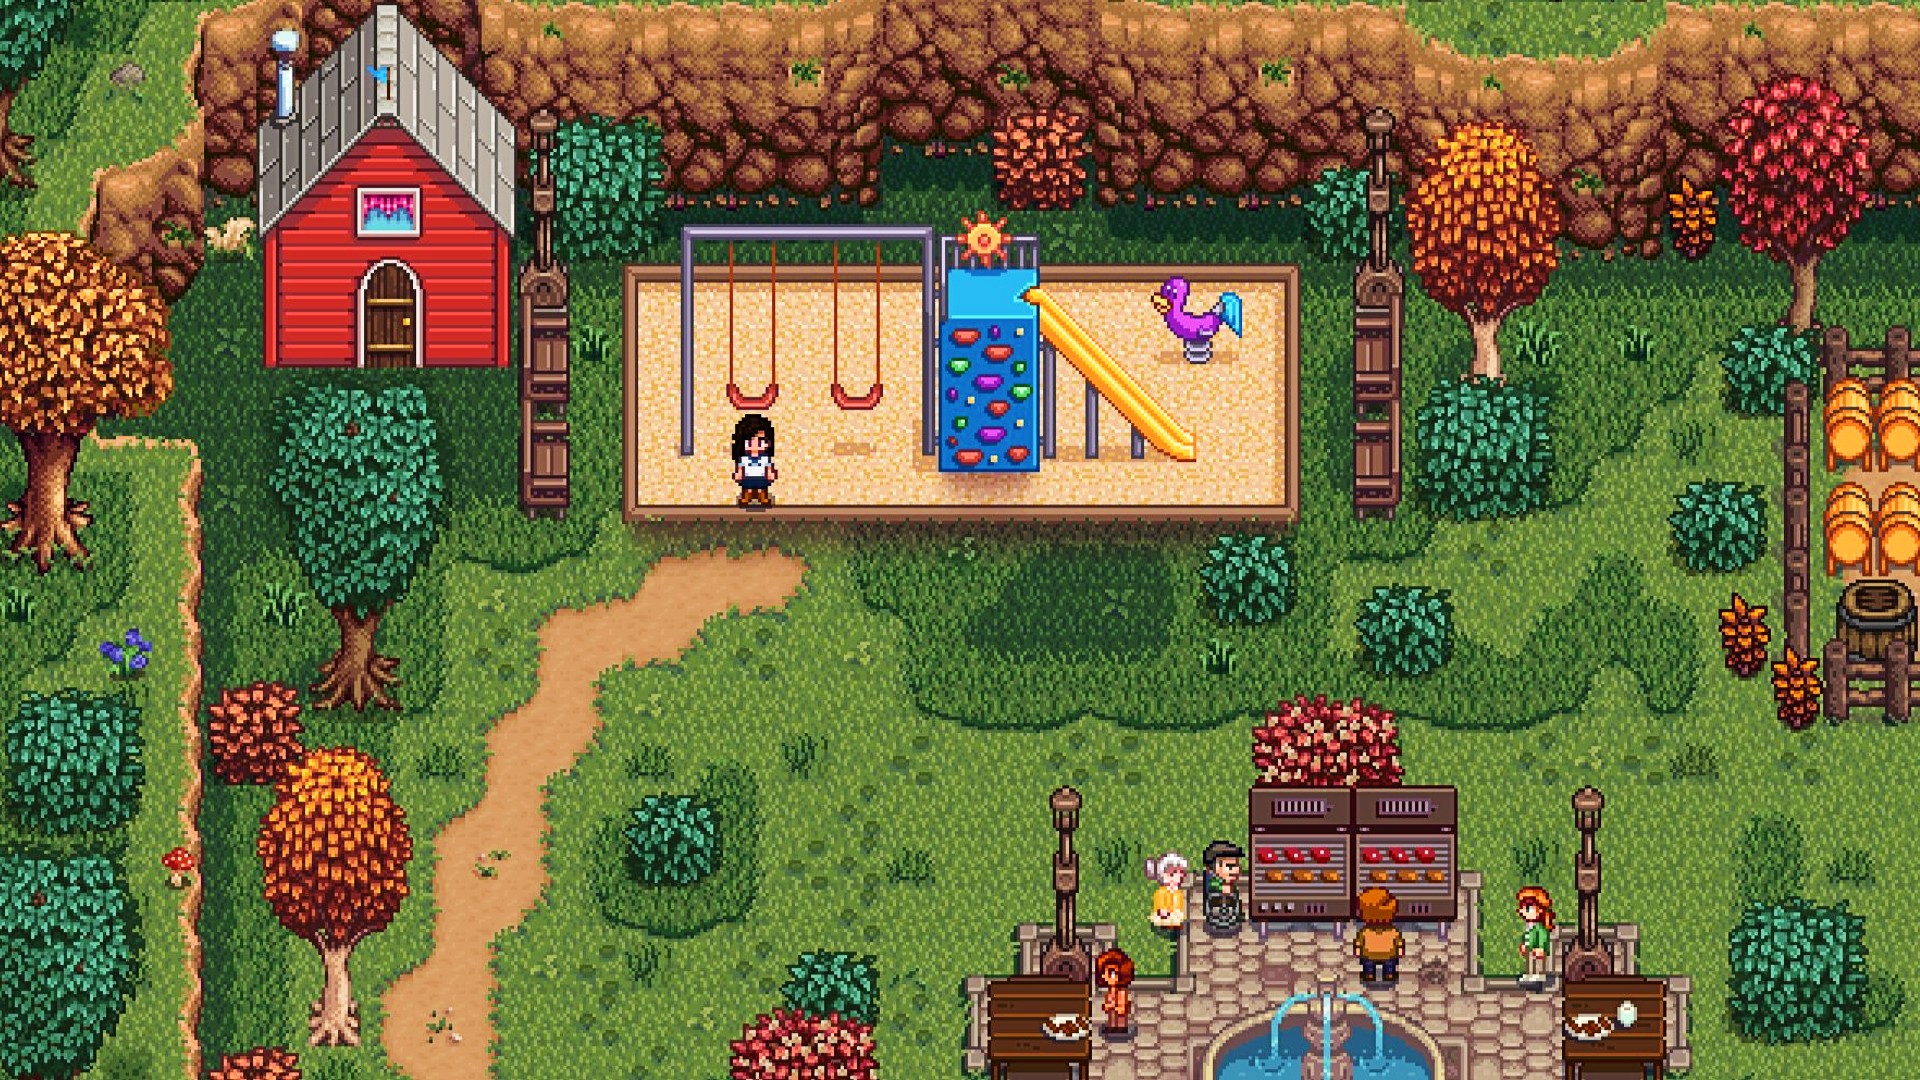 This Stardew Valley mod gives you an old abandoned school to fix up